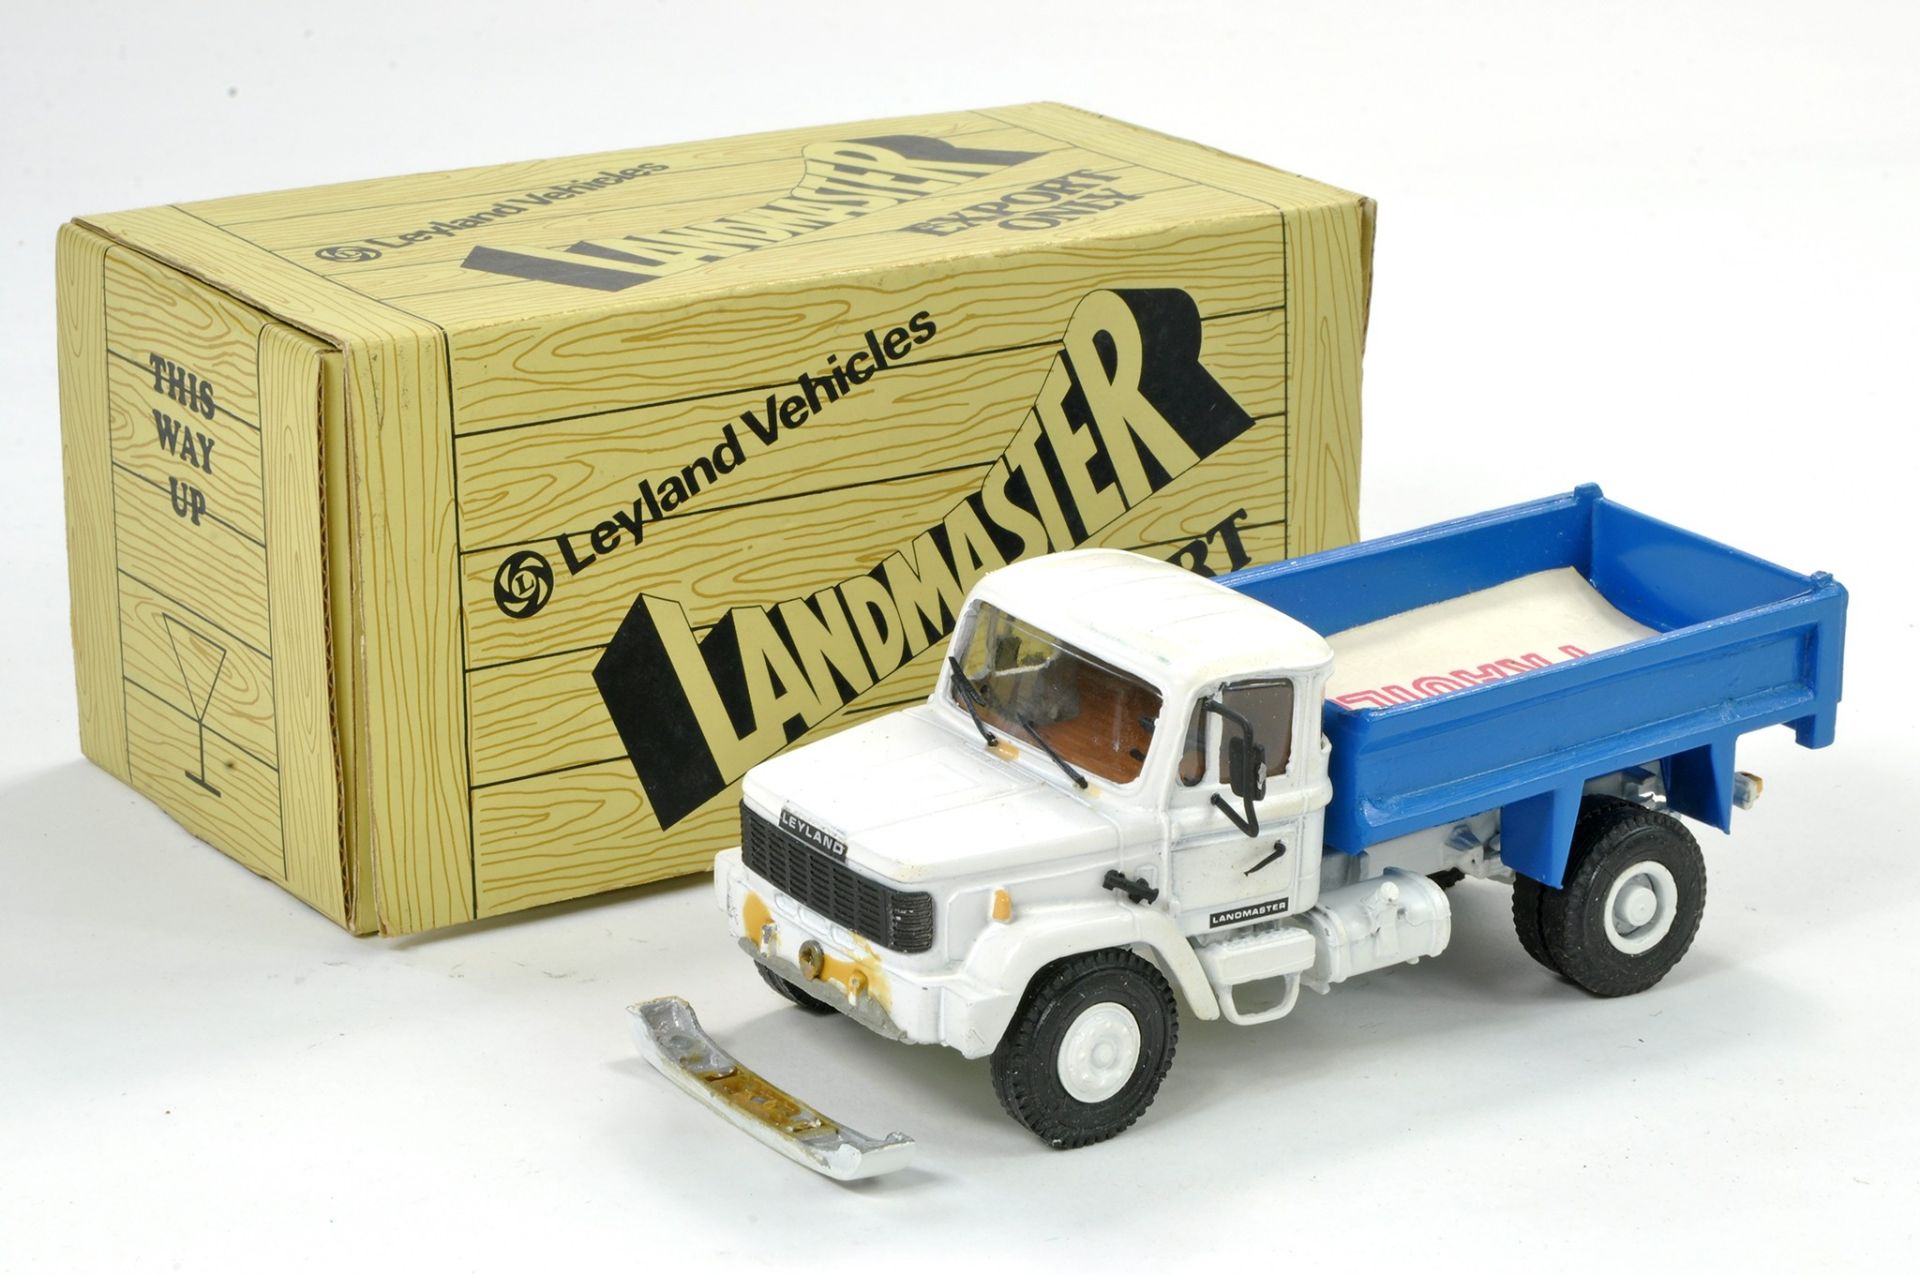 Leyland Landmaster Promotional Truck Issue, fragile item is hard to find. Some parts requiring